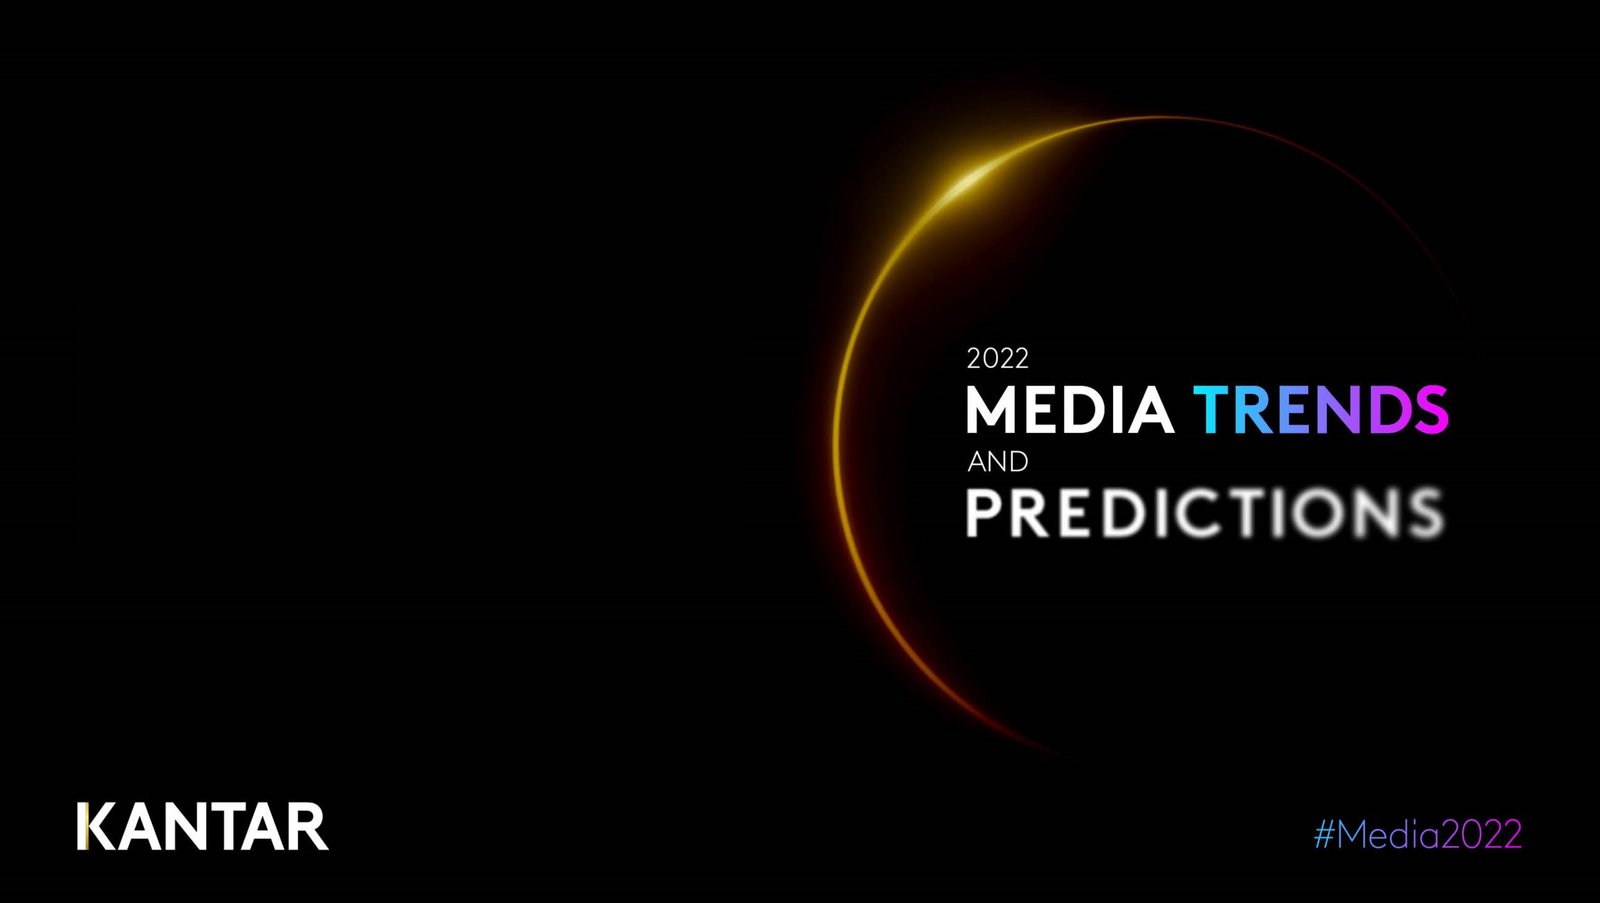 Kantar’s Media Trends And Predictions 2022 The Brandberries